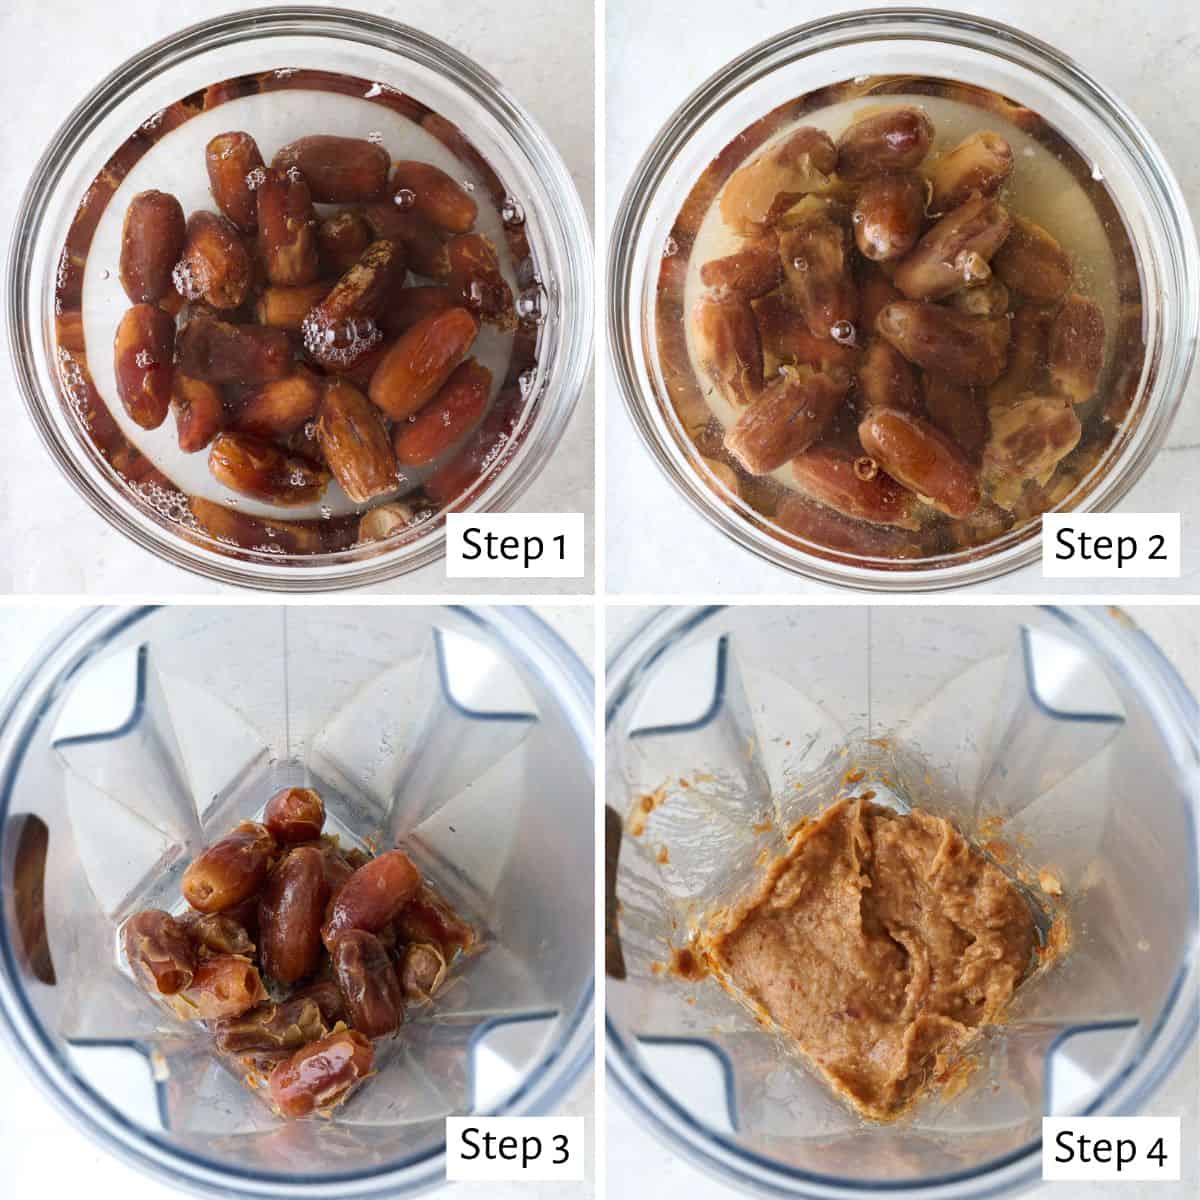 4 image collage making recipe: 1- dates in a bowl with water, 2- after soaking, 3- dates and liquid added to a blender, 4- after blending into a smooth paste.